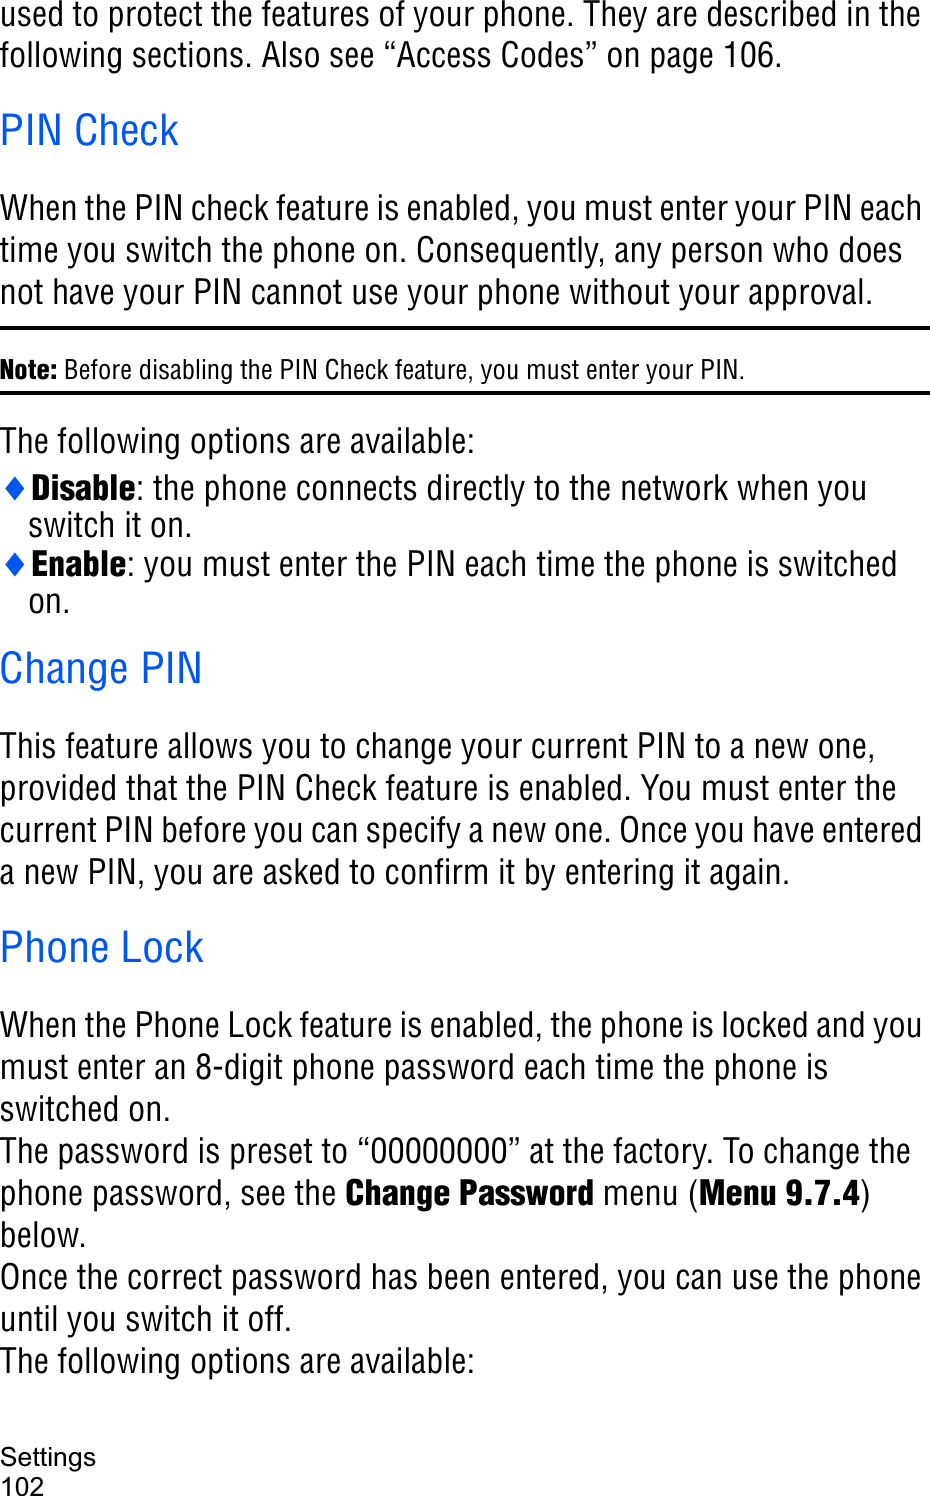 Settings102used to protect the features of your phone. They are described in the following sections. Also see “Access Codes” on page 106.PIN CheckWhen the PIN check feature is enabled, you must enter your PIN each time you switch the phone on. Consequently, any person who does not have your PIN cannot use your phone without your approval.Note: Before disabling the PIN Check feature, you must enter your PIN.The following options are available:iDisable: the phone connects directly to the network when you switch it on.iEnable: you must enter the PIN each time the phone is switched on.Change PINThis feature allows you to change your current PIN to a new one, provided that the PIN Check feature is enabled. You must enter the current PIN before you can specify a new one. Once you have entered a new PIN, you are asked to confirm it by entering it again.Phone LockWhen the Phone Lock feature is enabled, the phone is locked and you must enter an 8-digit phone password each time the phone is switched on.The password is preset to “00000000” at the factory. To change the phone password, see the Change Password menu (Menu 9.7.4)below.Once the correct password has been entered, you can use the phone until you switch it off.The following options are available: